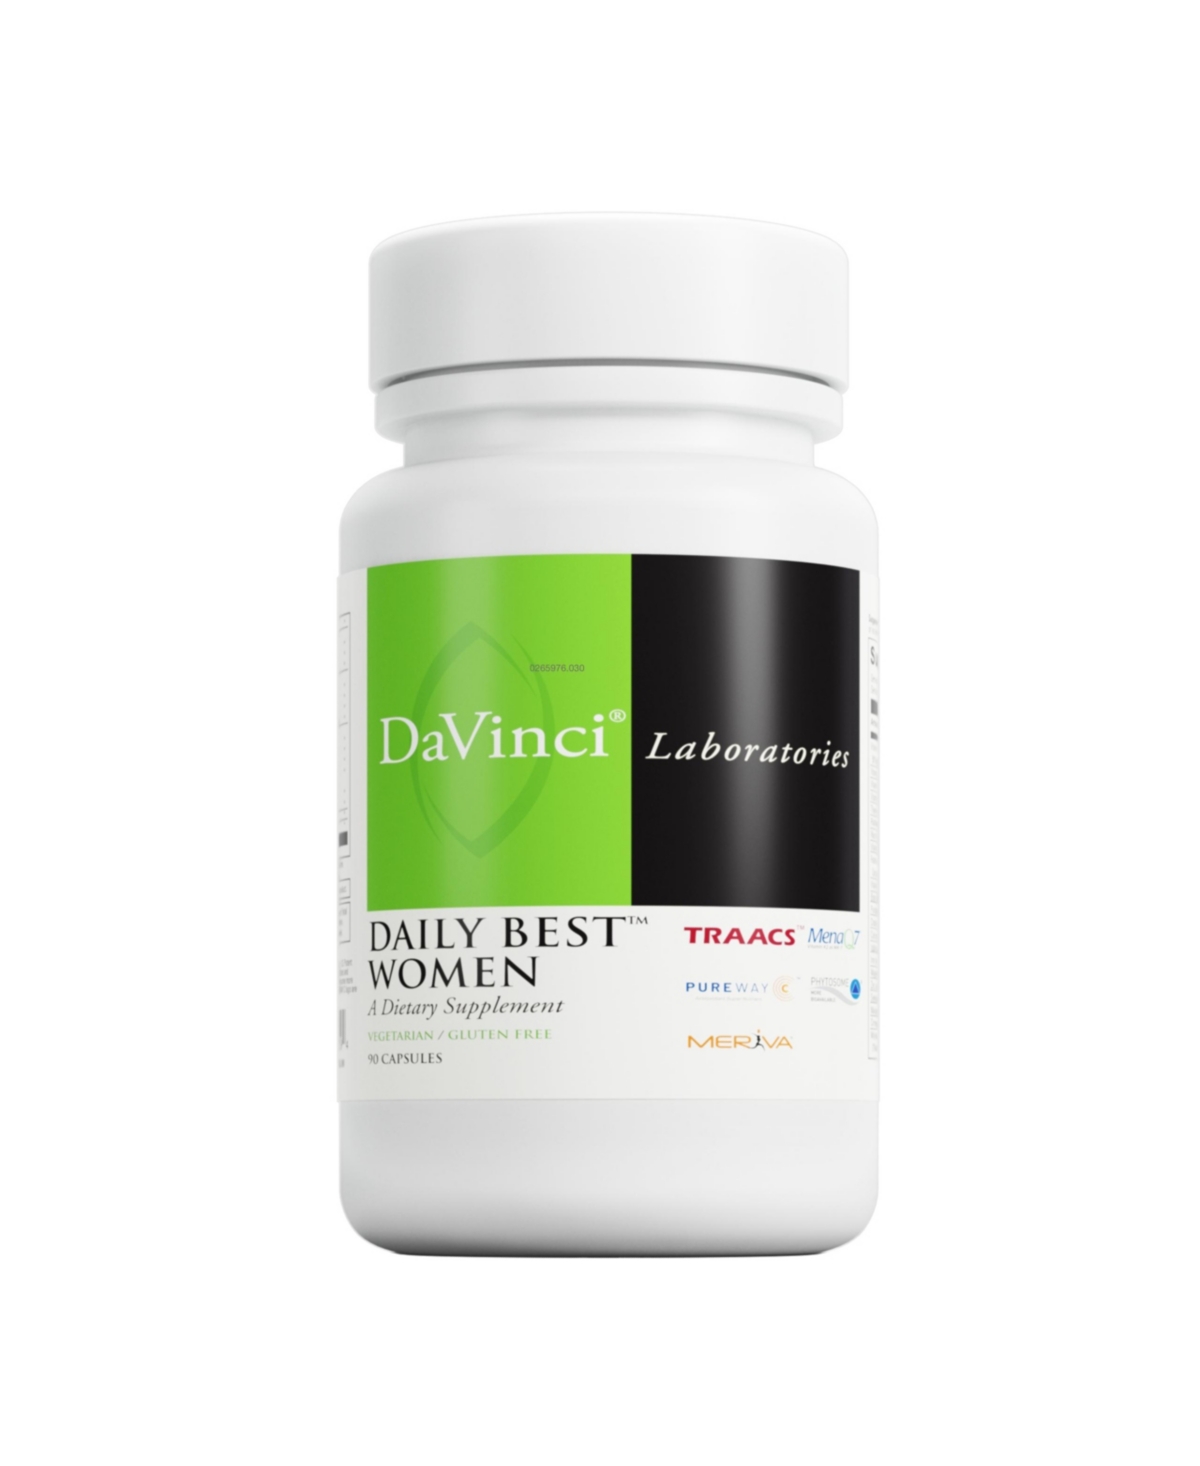 DaVinci Labs - Daily Best Women - A Dietary Supplement with Vitamin B6, Vitamin B12 Vitamin C, Vitamin K2, and More - Vegetarian,